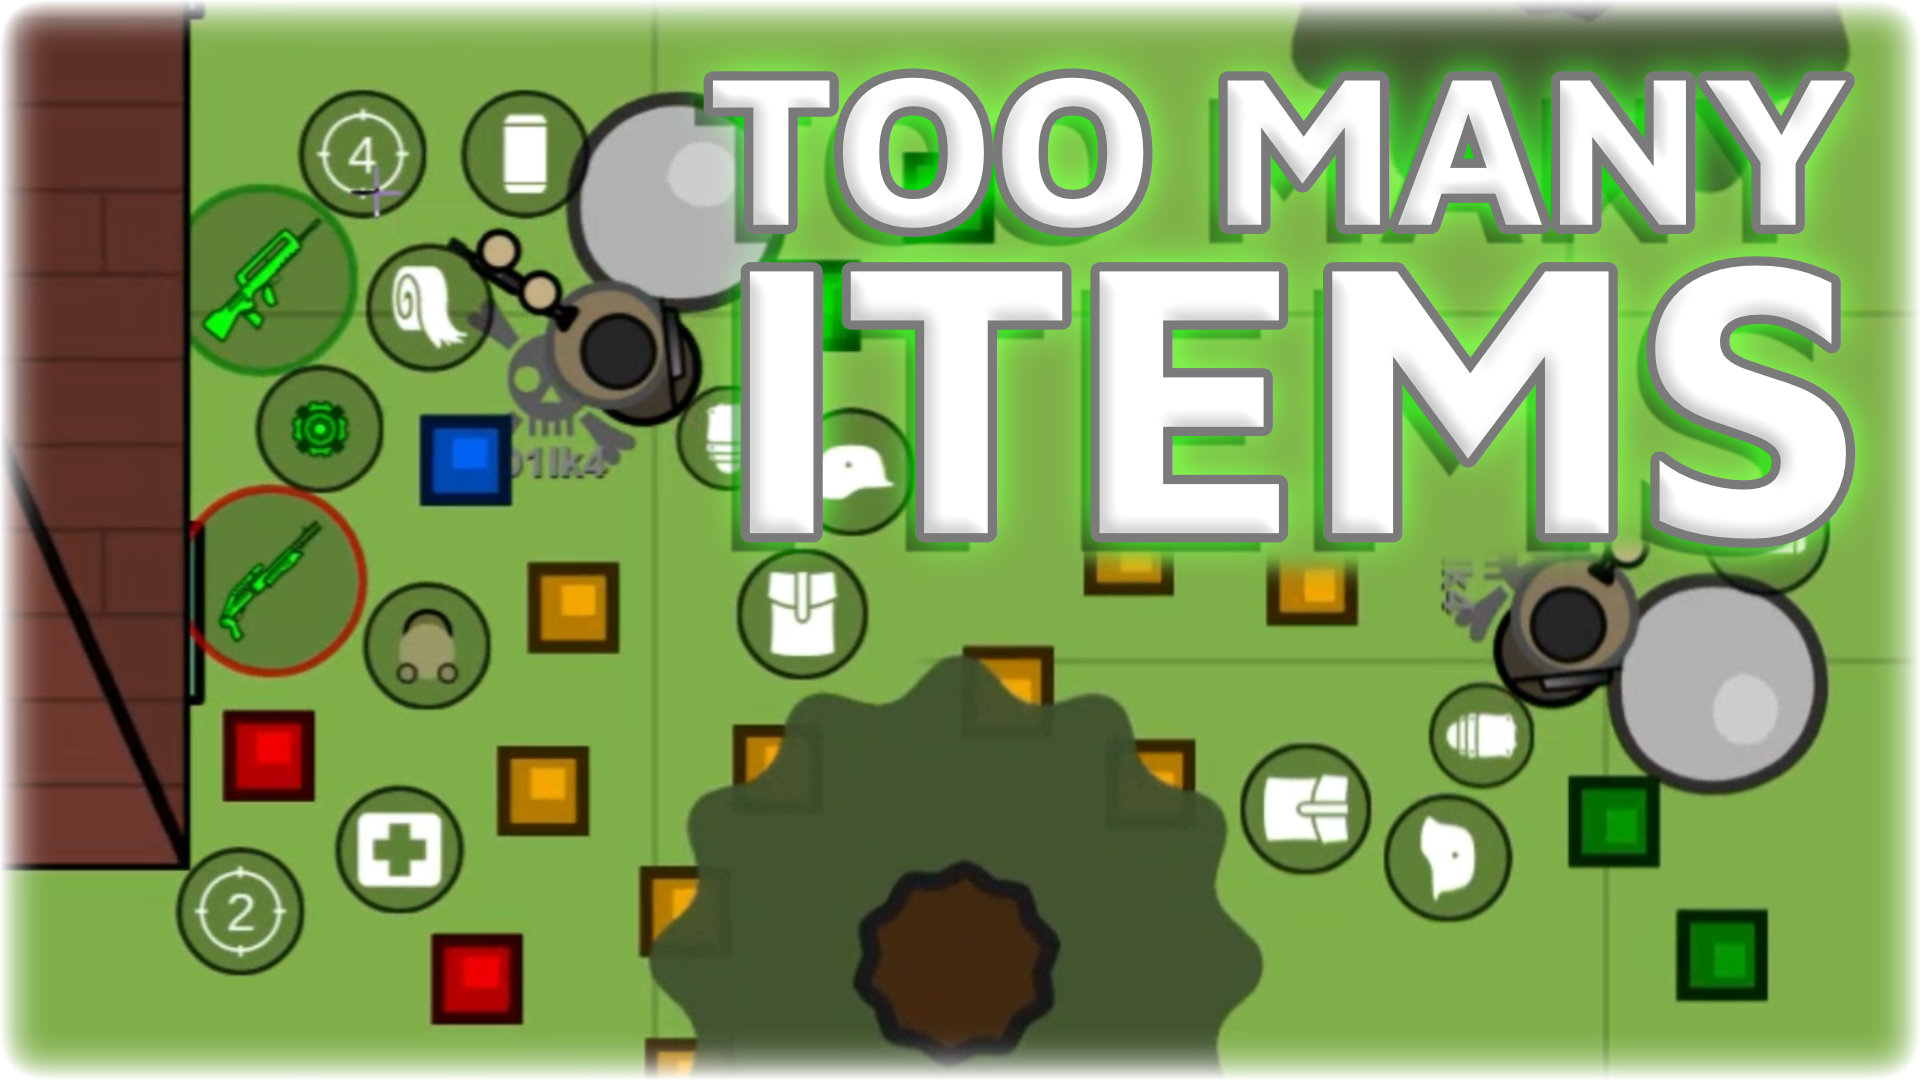 there are TOO MANY ITEMS WTF!